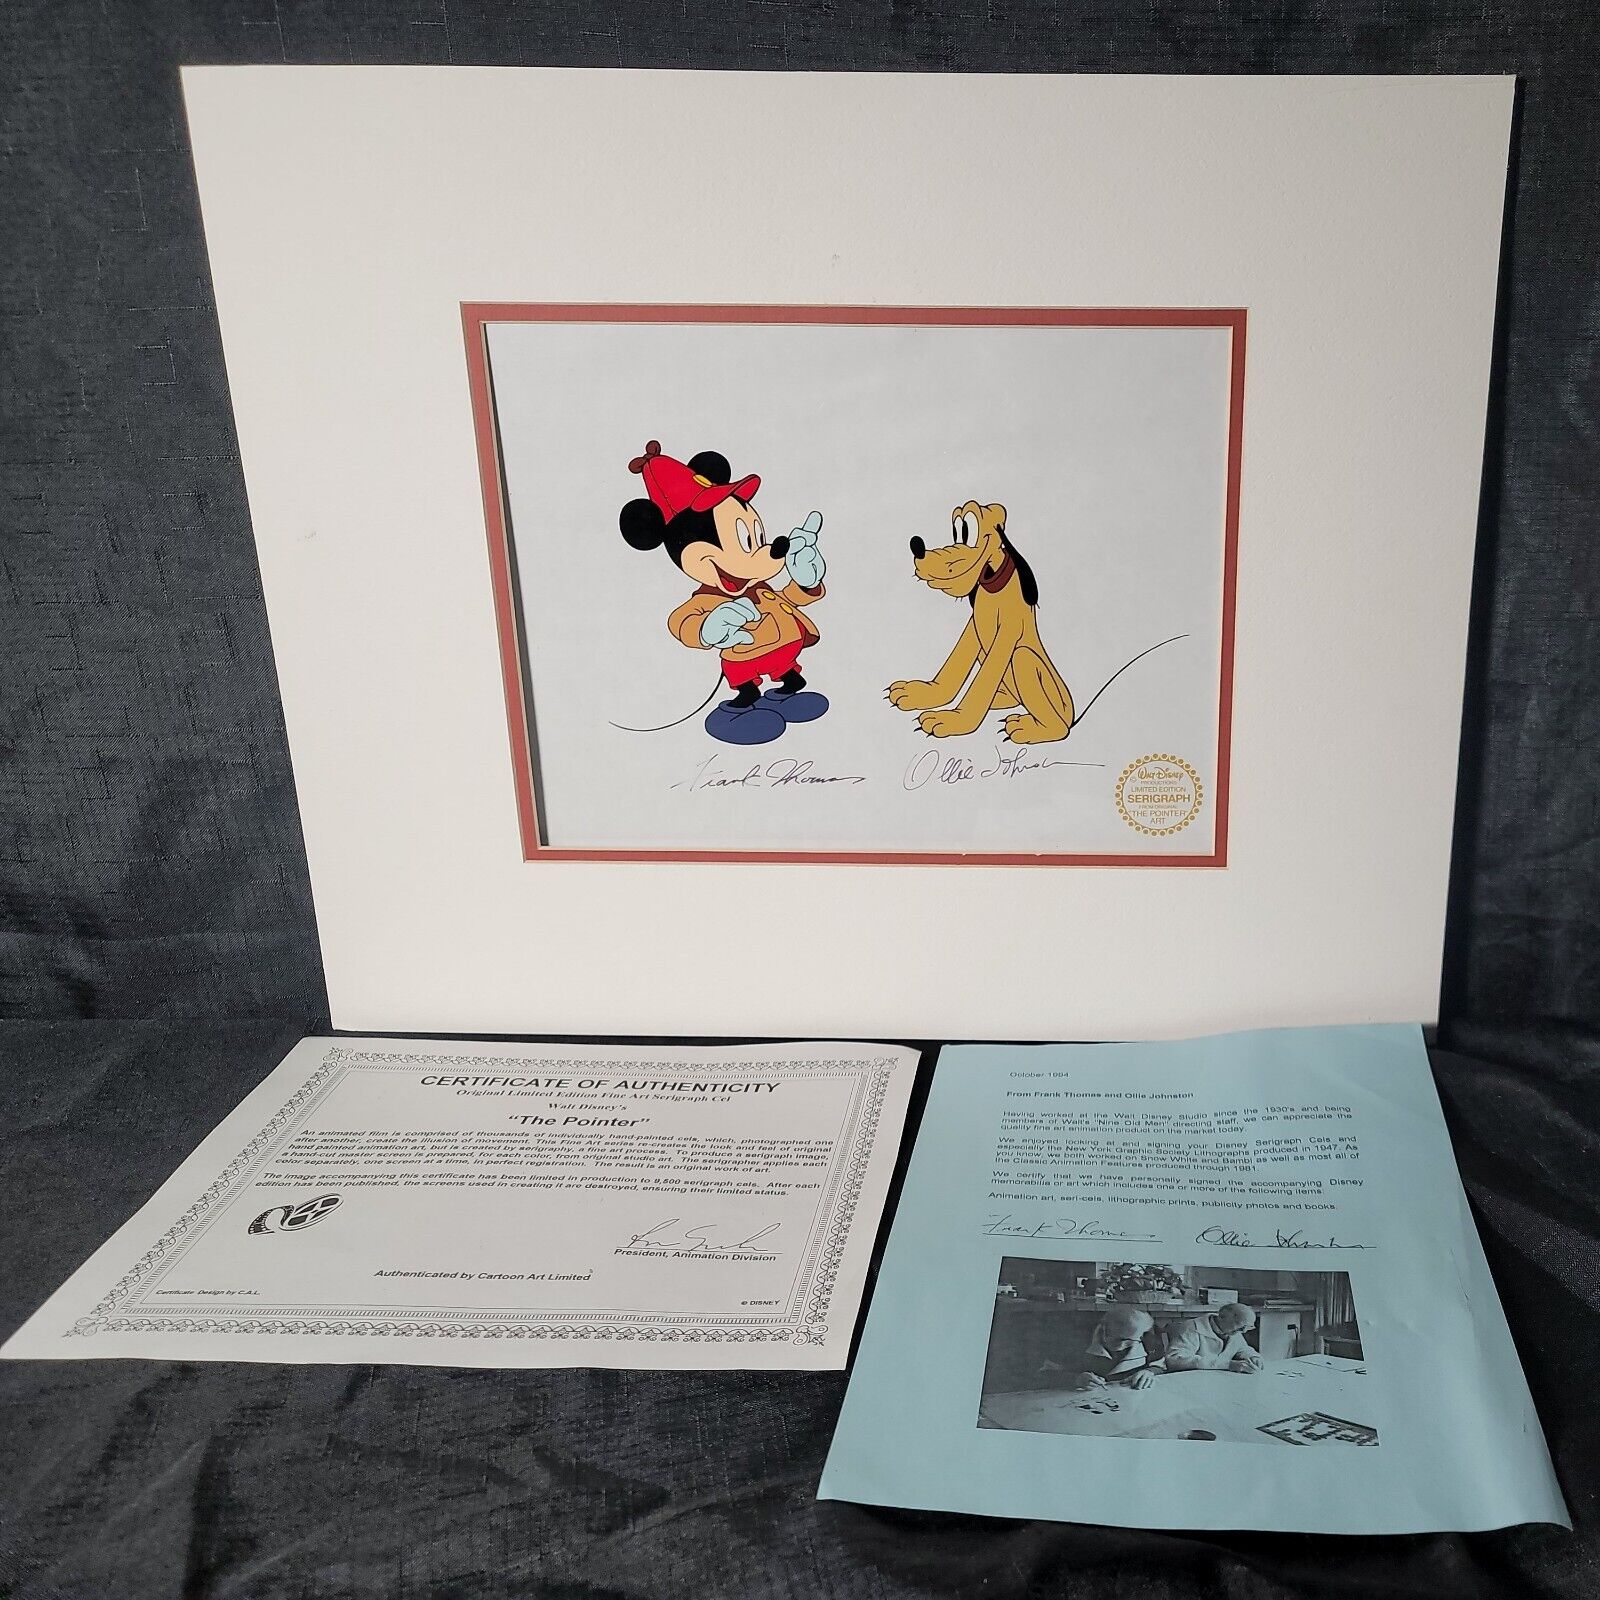 Frank Thomas Ollie Johnston Signed Serigraph The Pointer Mickey Mouse Pluto Cel